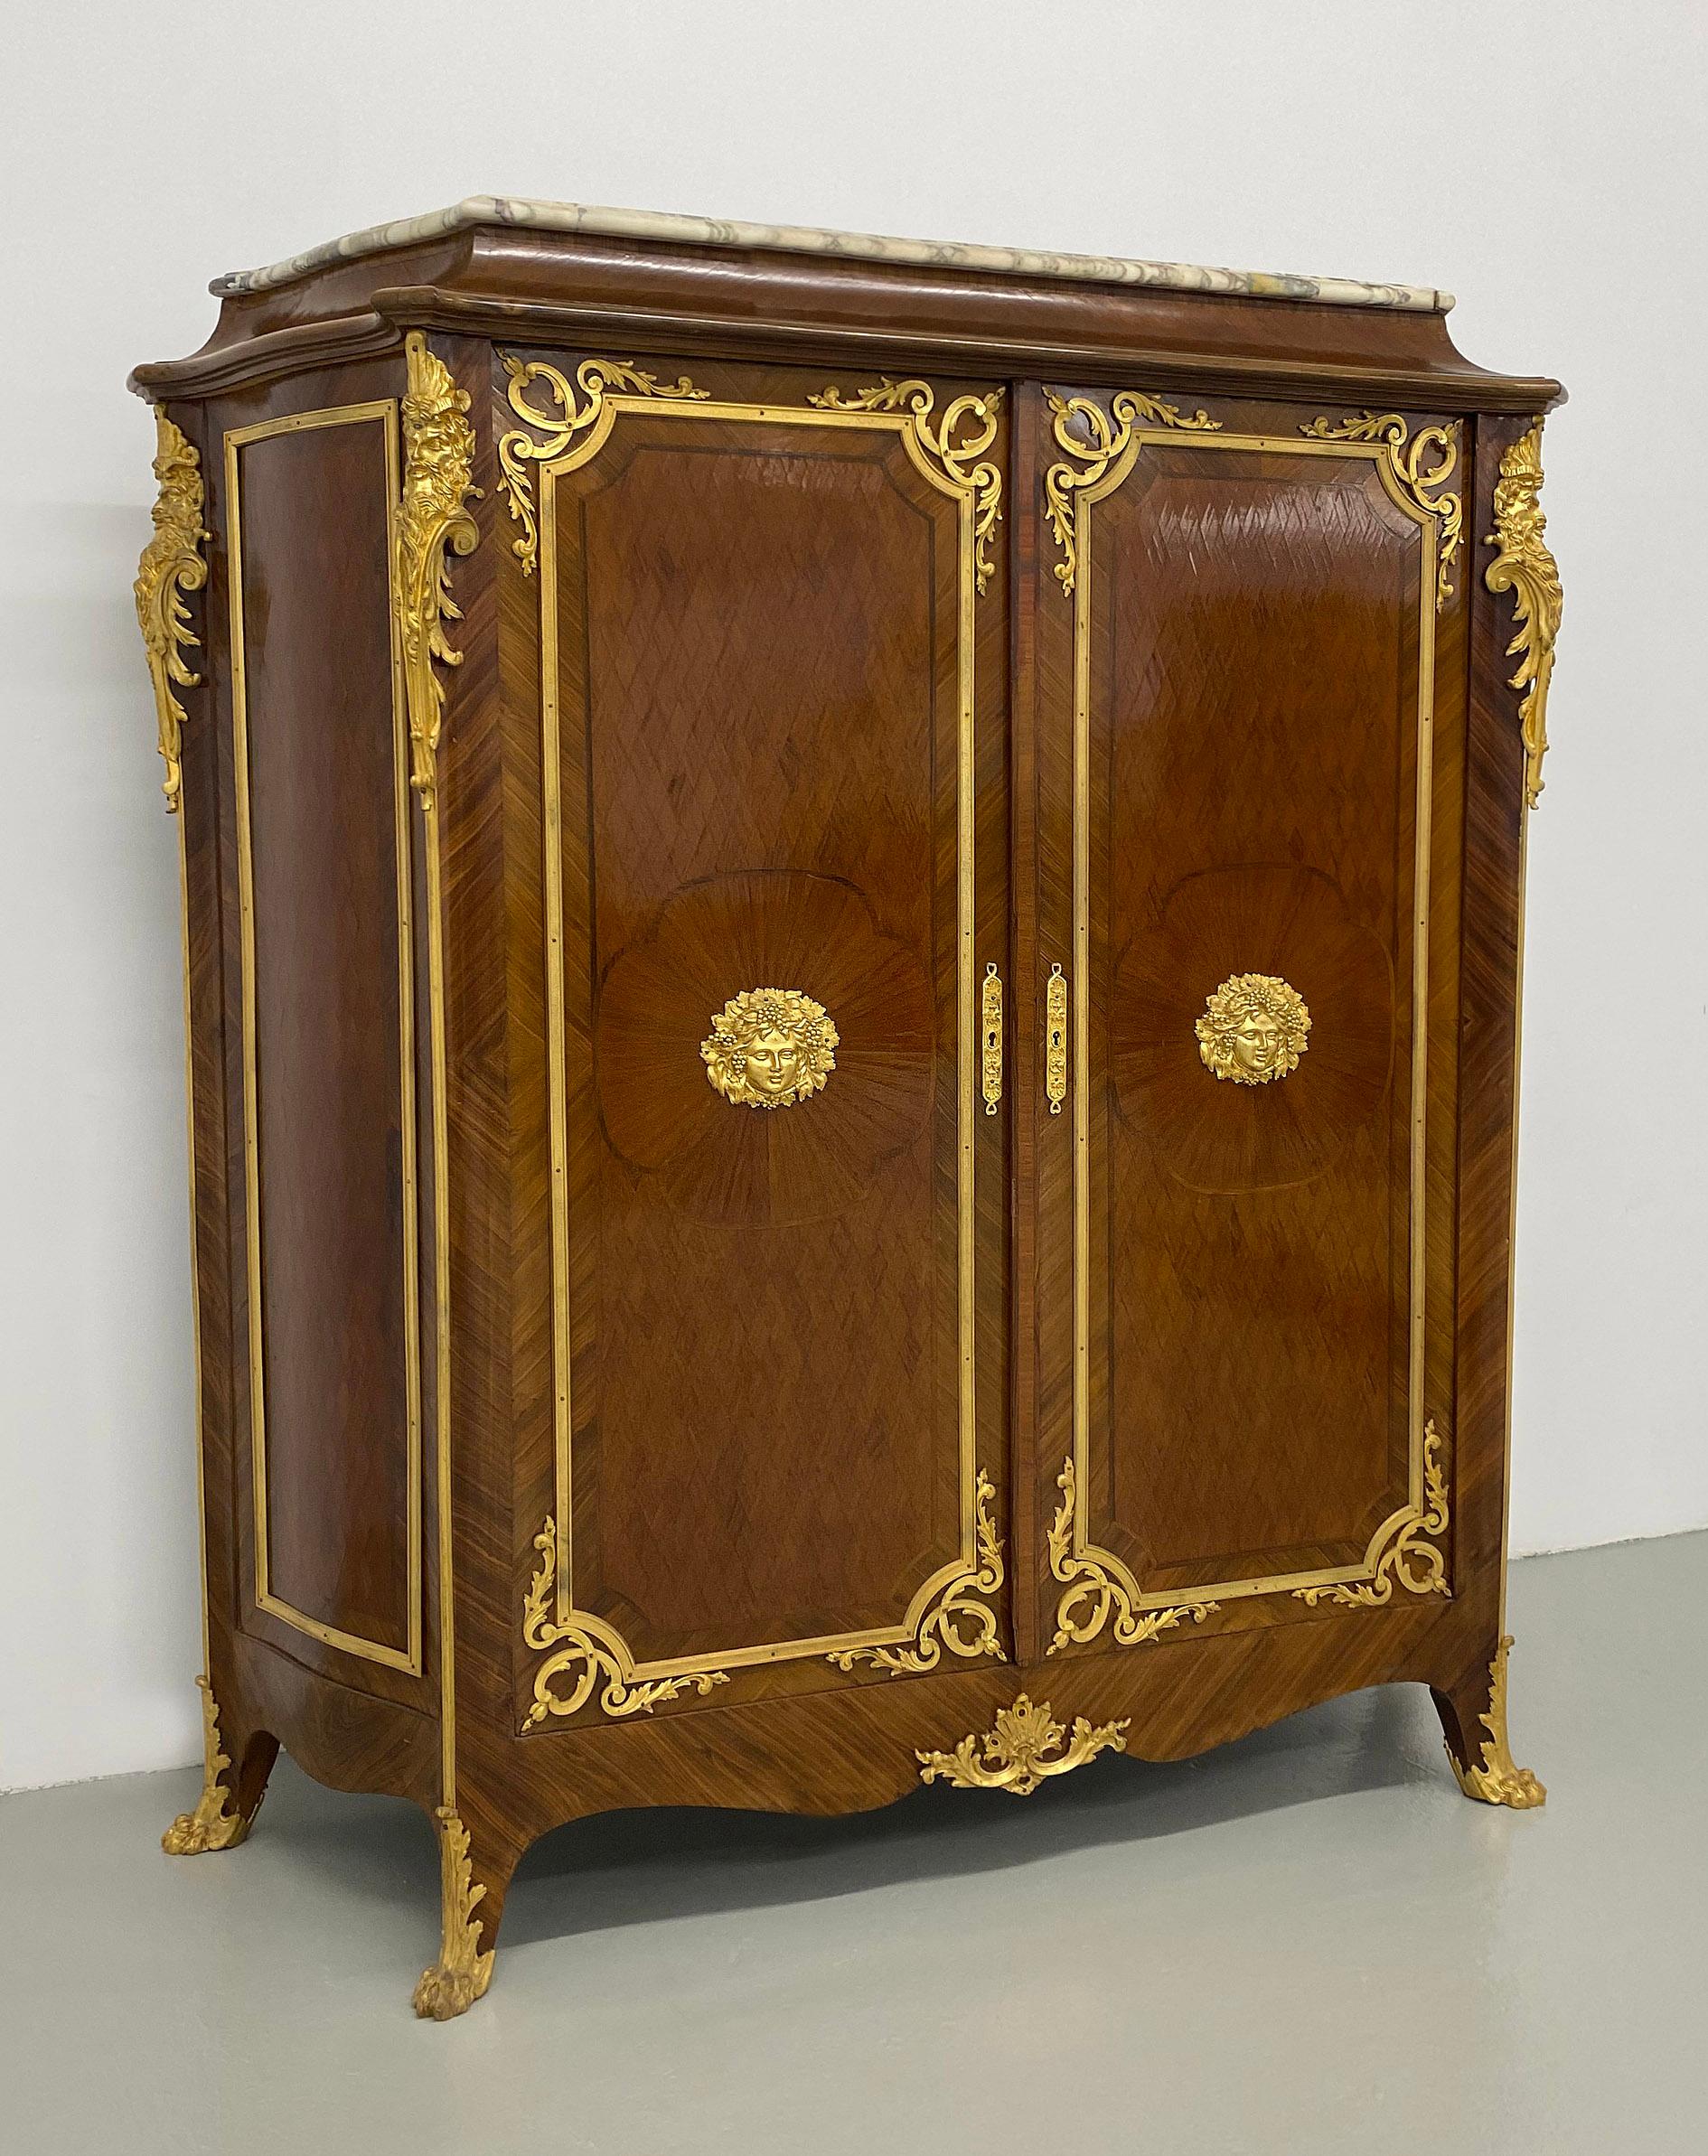 A Nice Late 19th Century Gilt Bronze Mounted Transitional Style Parquetry Cabinet

Marble top above two doors. each door centered by a Bacchus mask within sunburst veneer, the corners with bearded men, the cabinet is designed with diamond parquetry